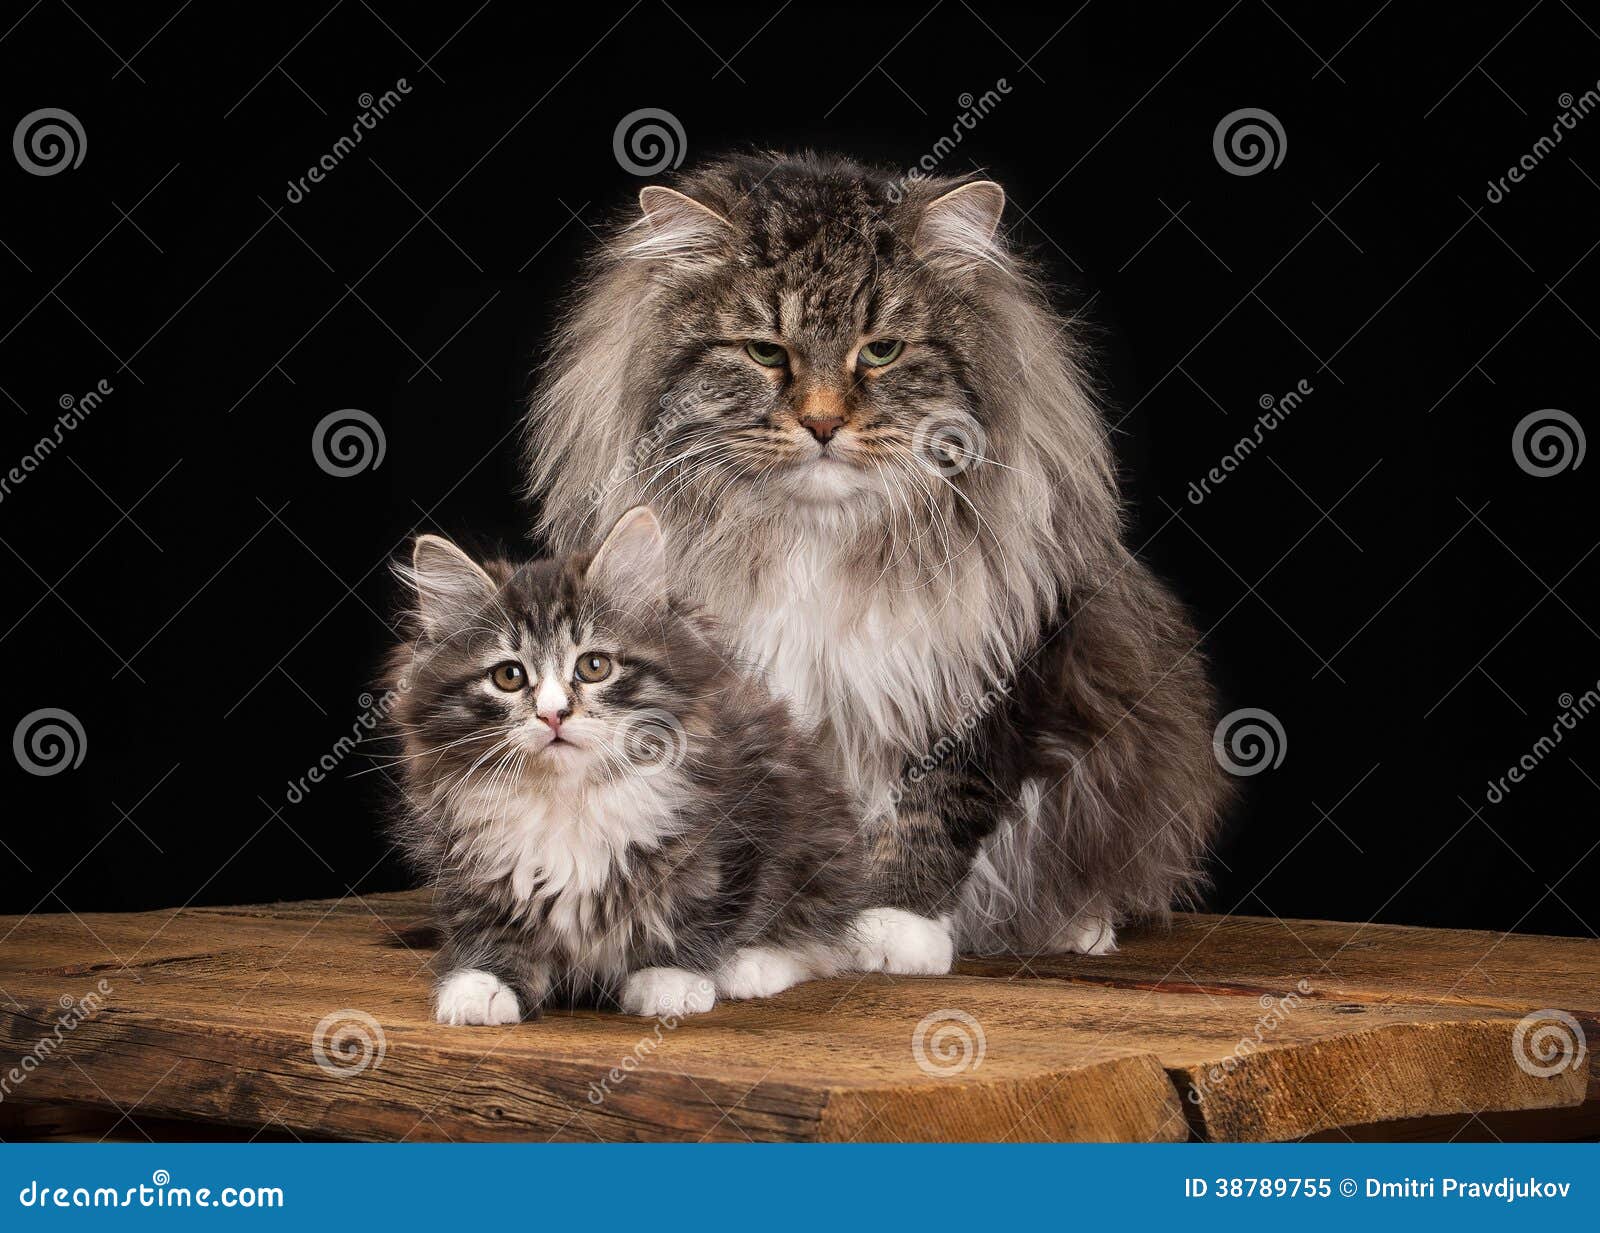 great siberian cat on black background with wooden texture